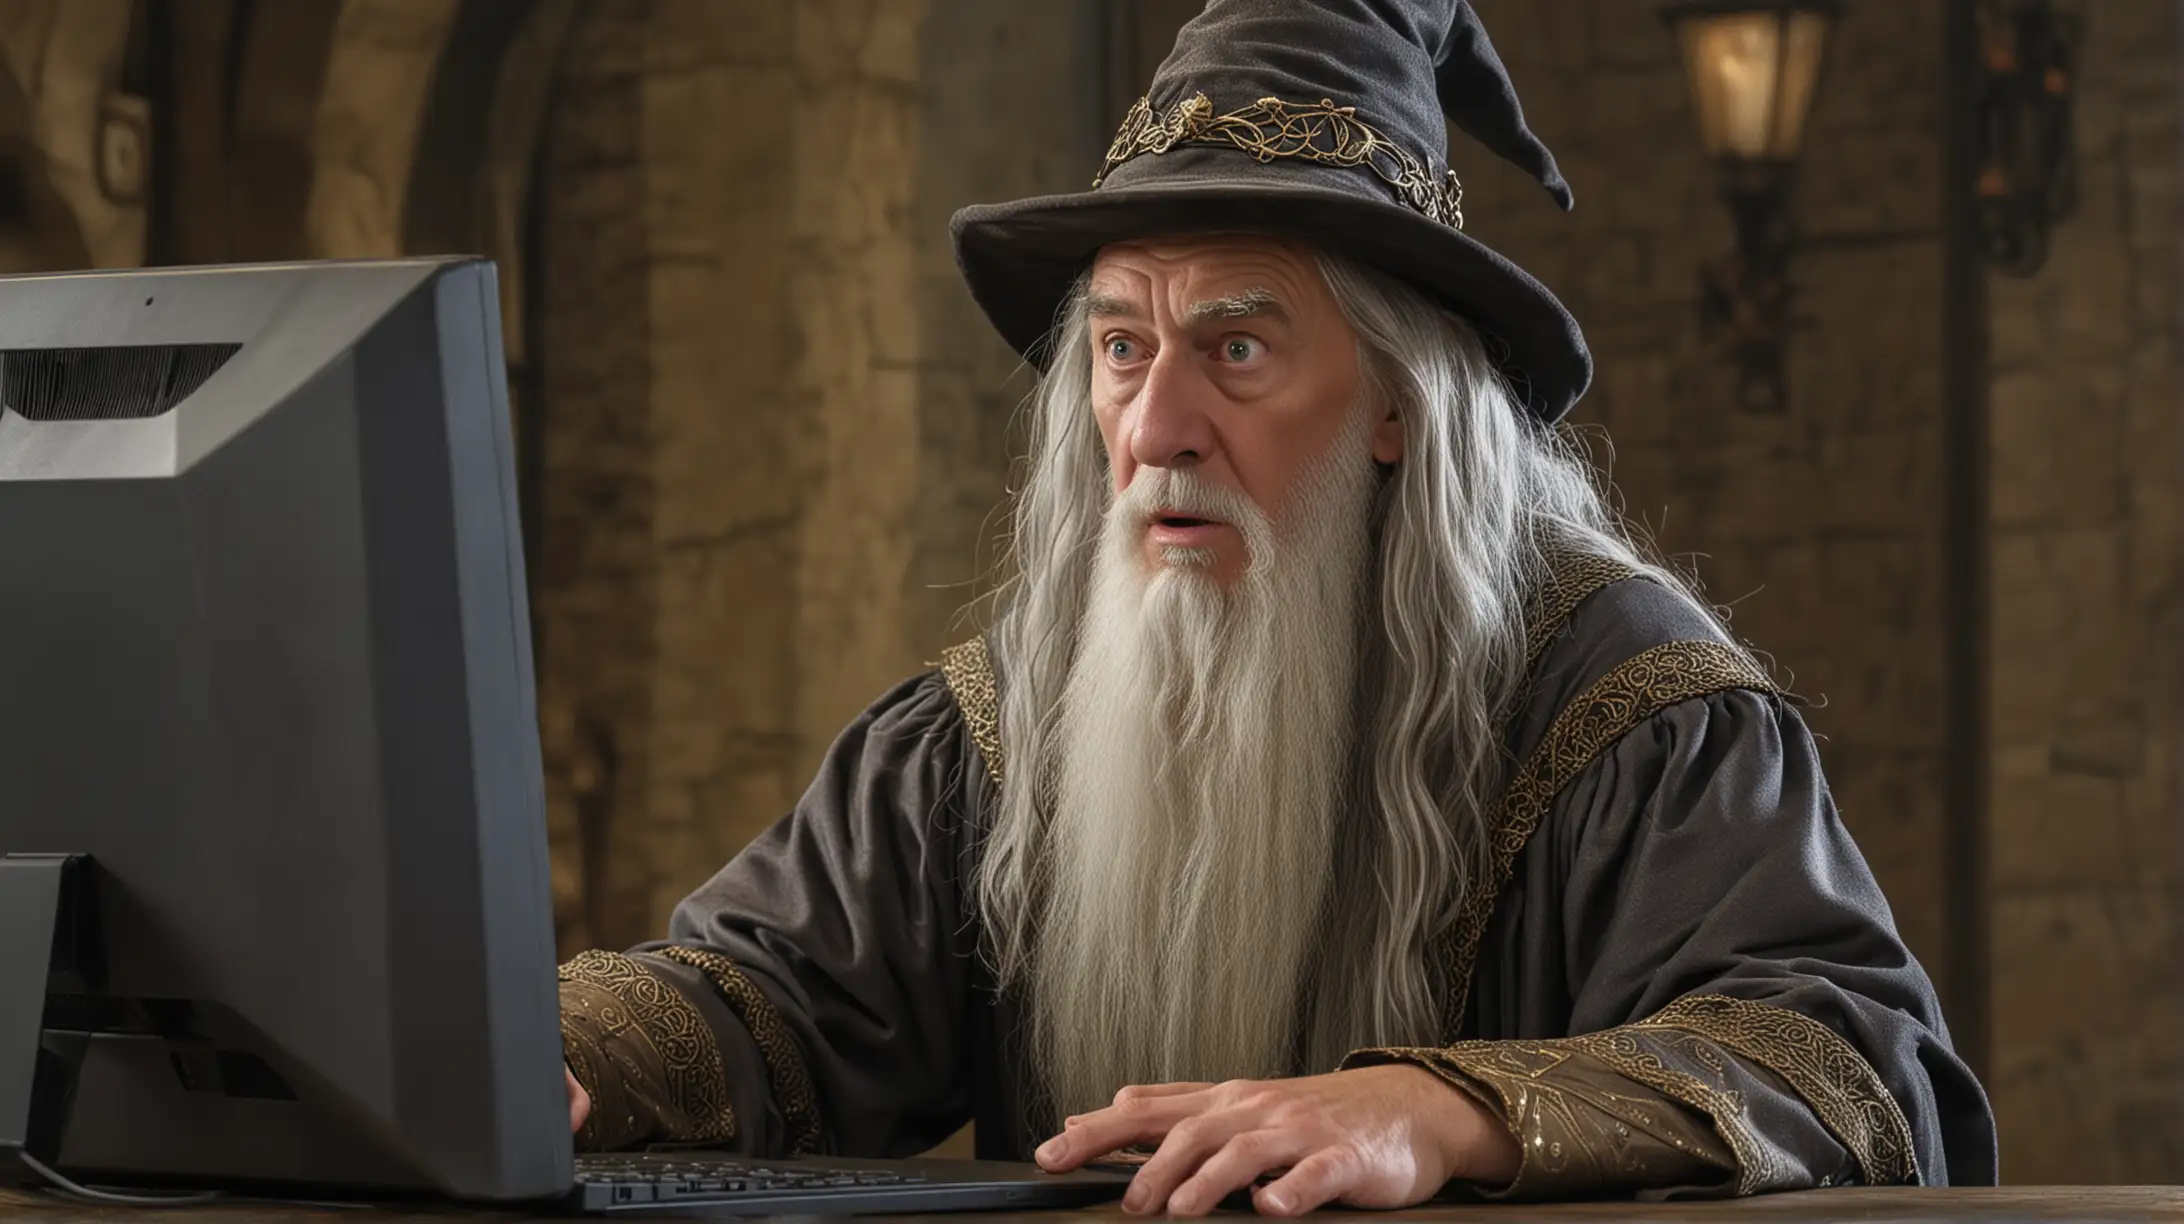 The wizard sat looking confused at a computer